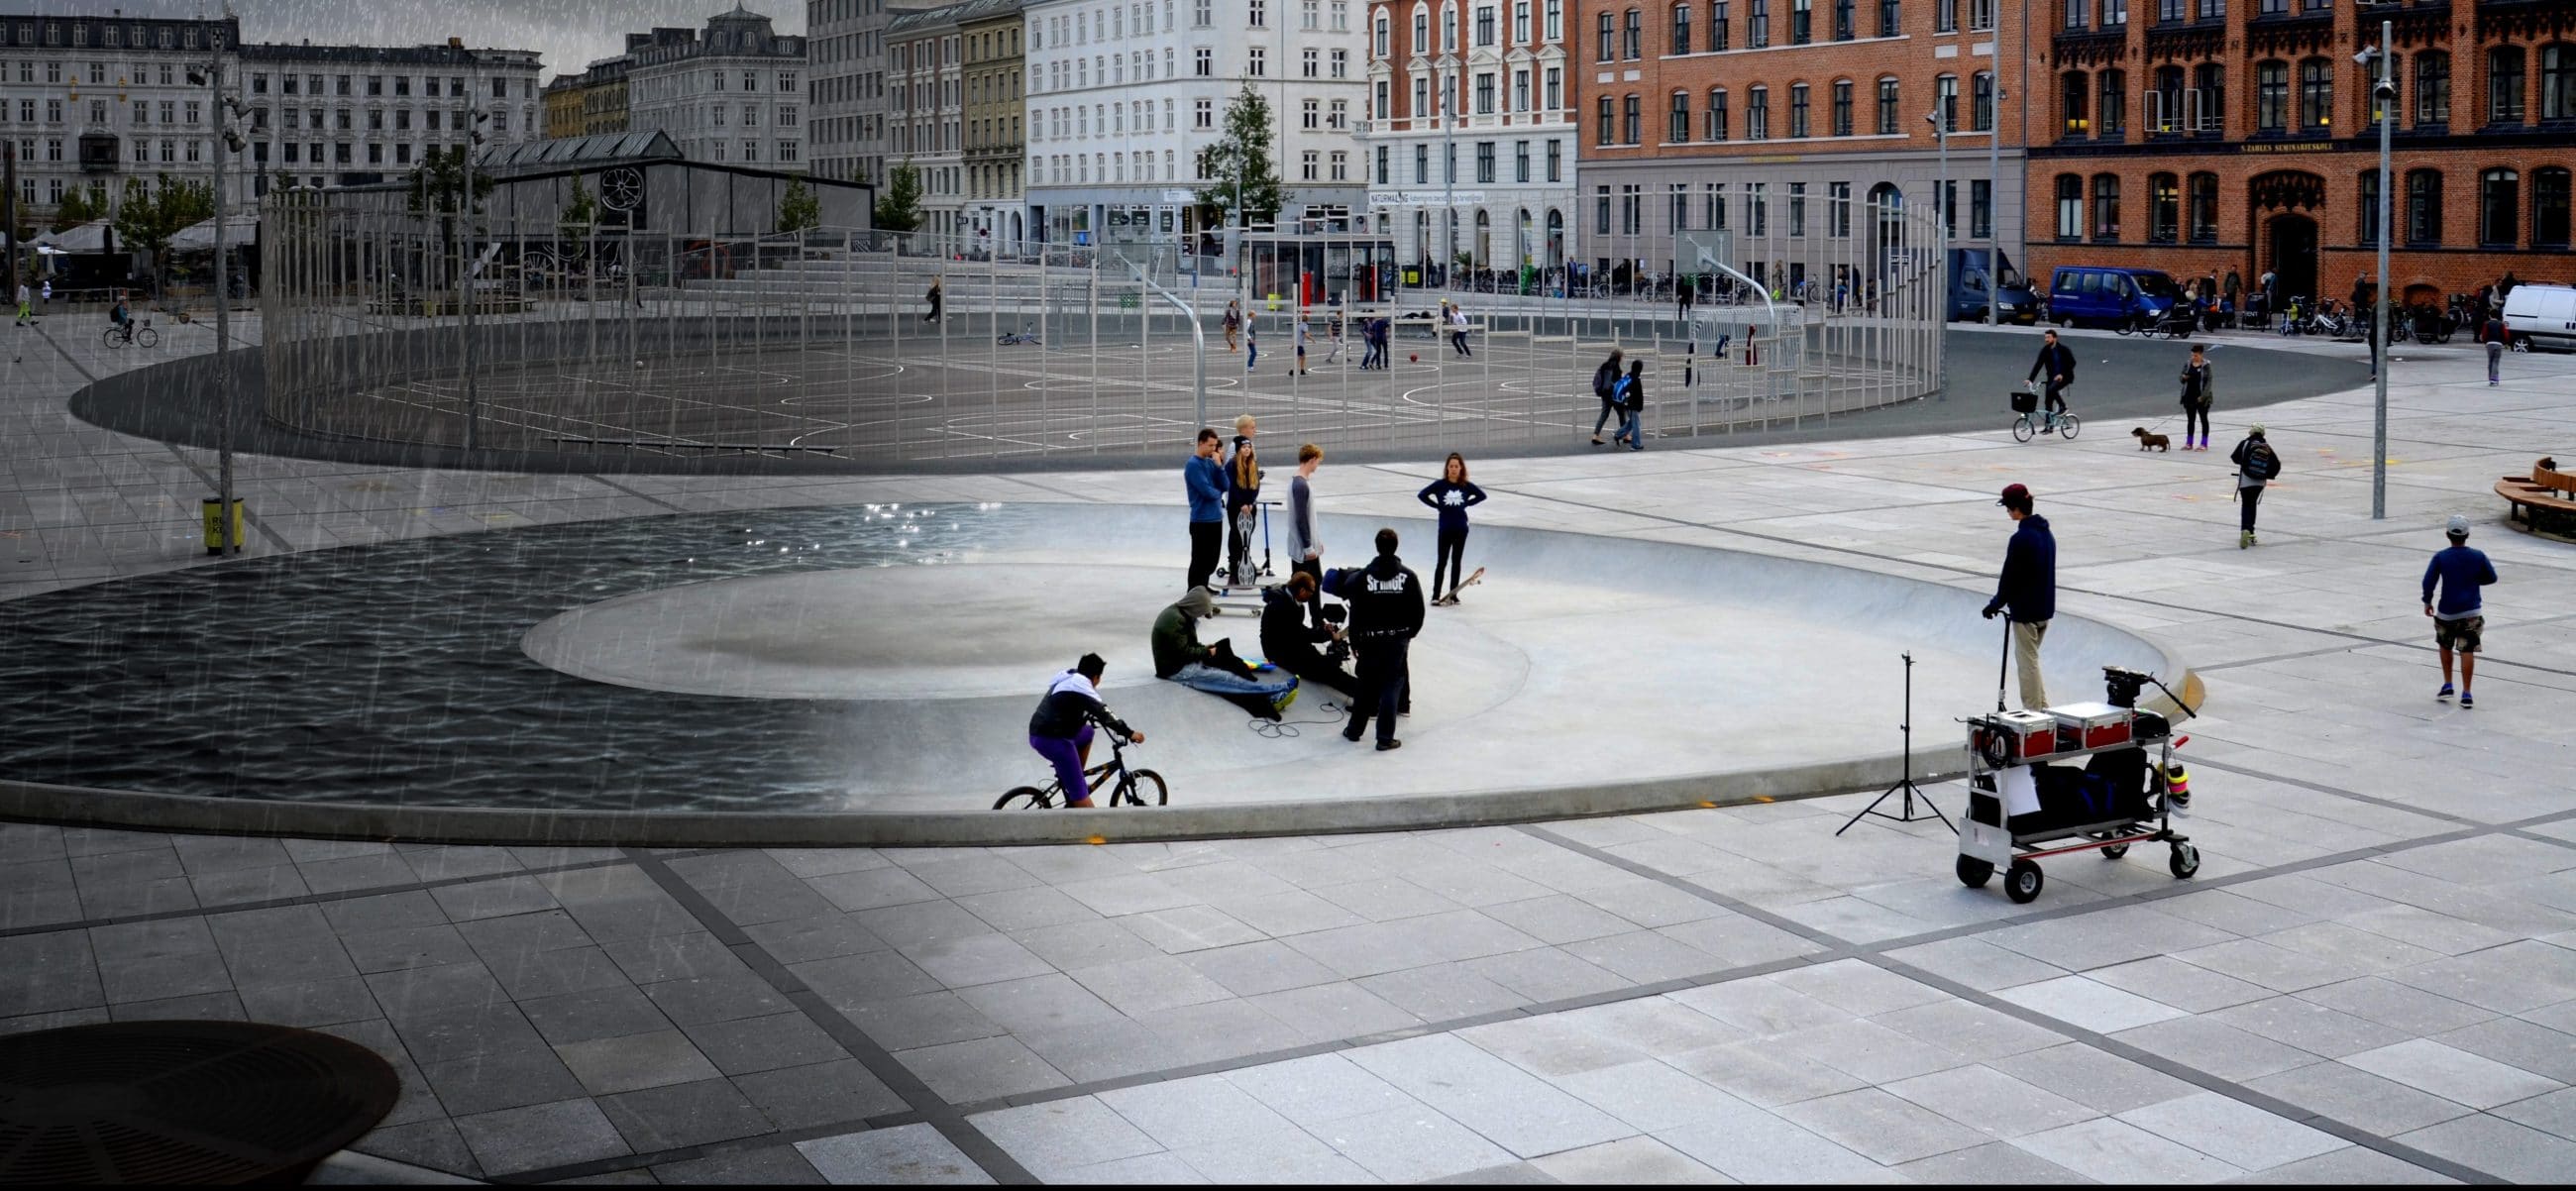 climate change adaptation solution in Israels Plads, Denmark.